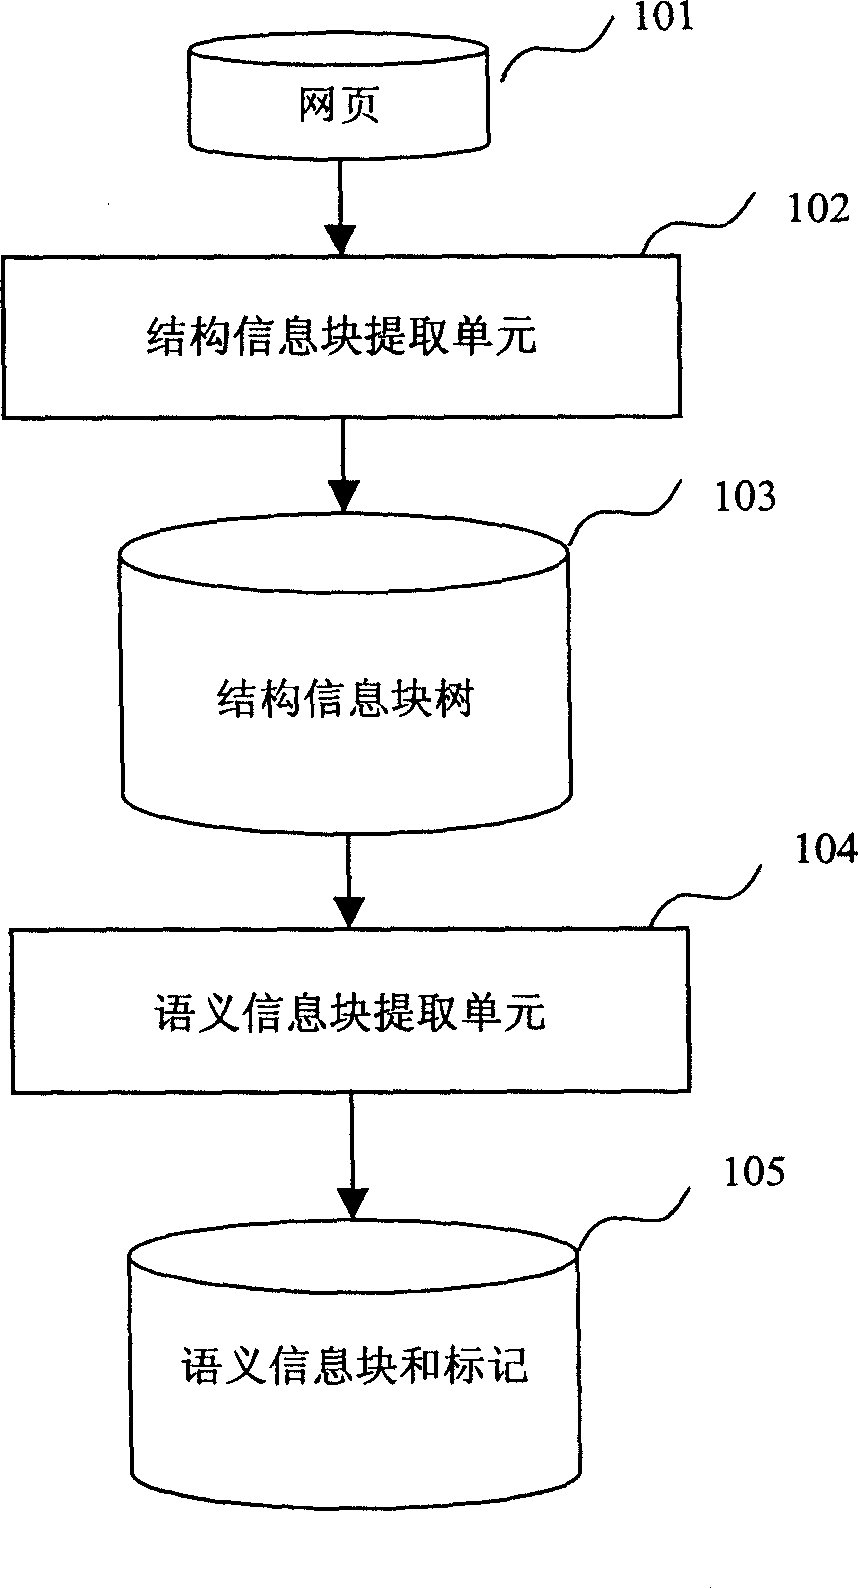 Web page information block extracting method and apparatus